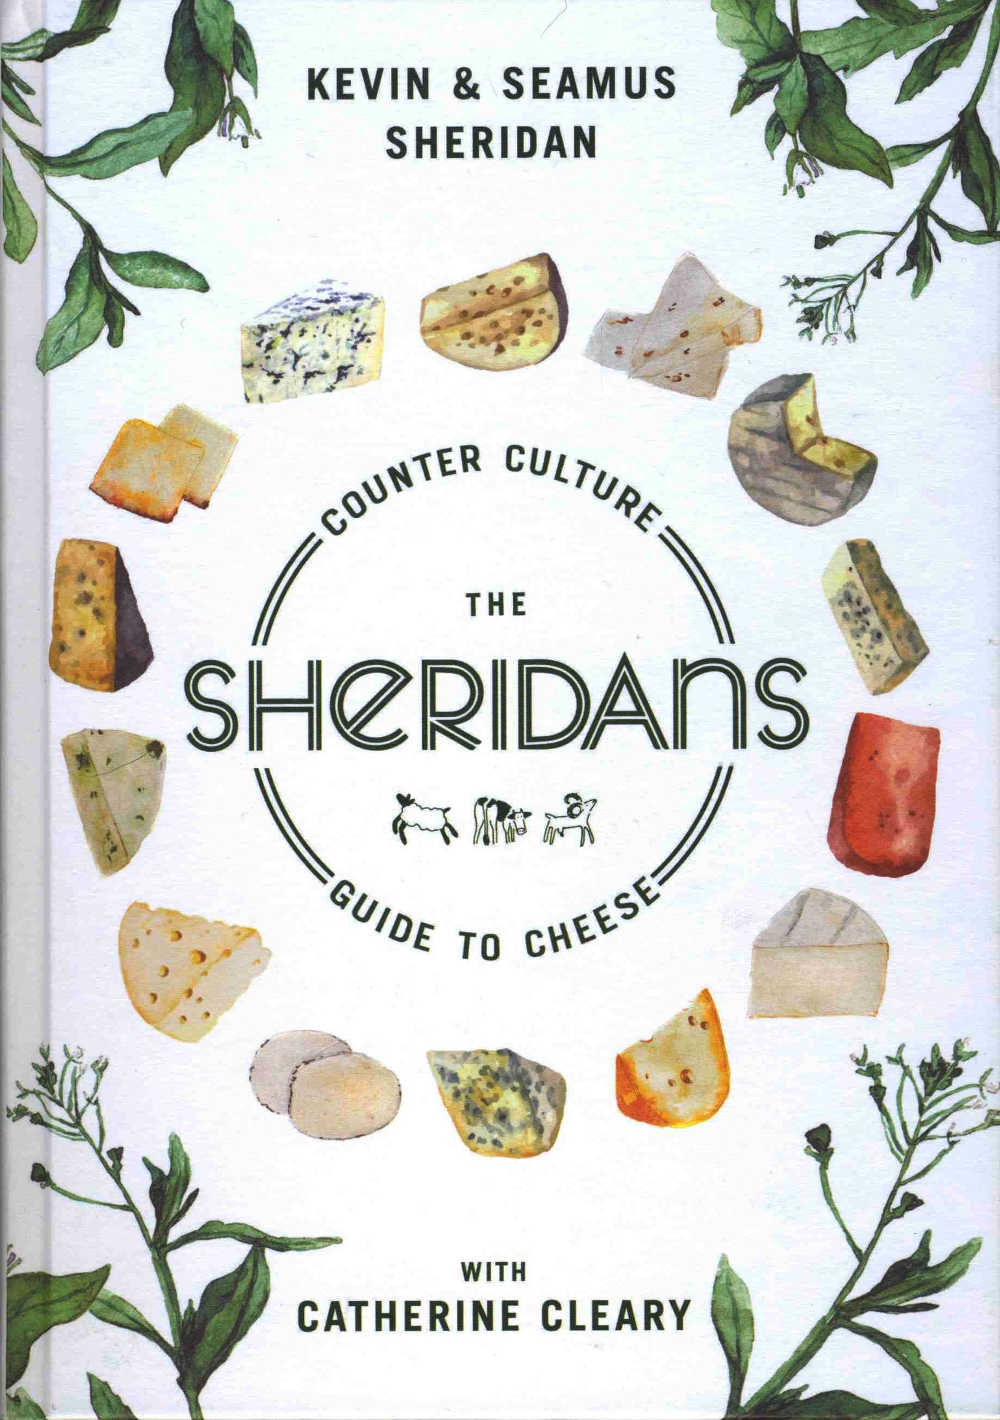 Counter Culture - The Sheridans Guide to Cheese, by Kevin and Seamus Sheridan, with Catherine Cleary (Transworld; hardback, £16.99)